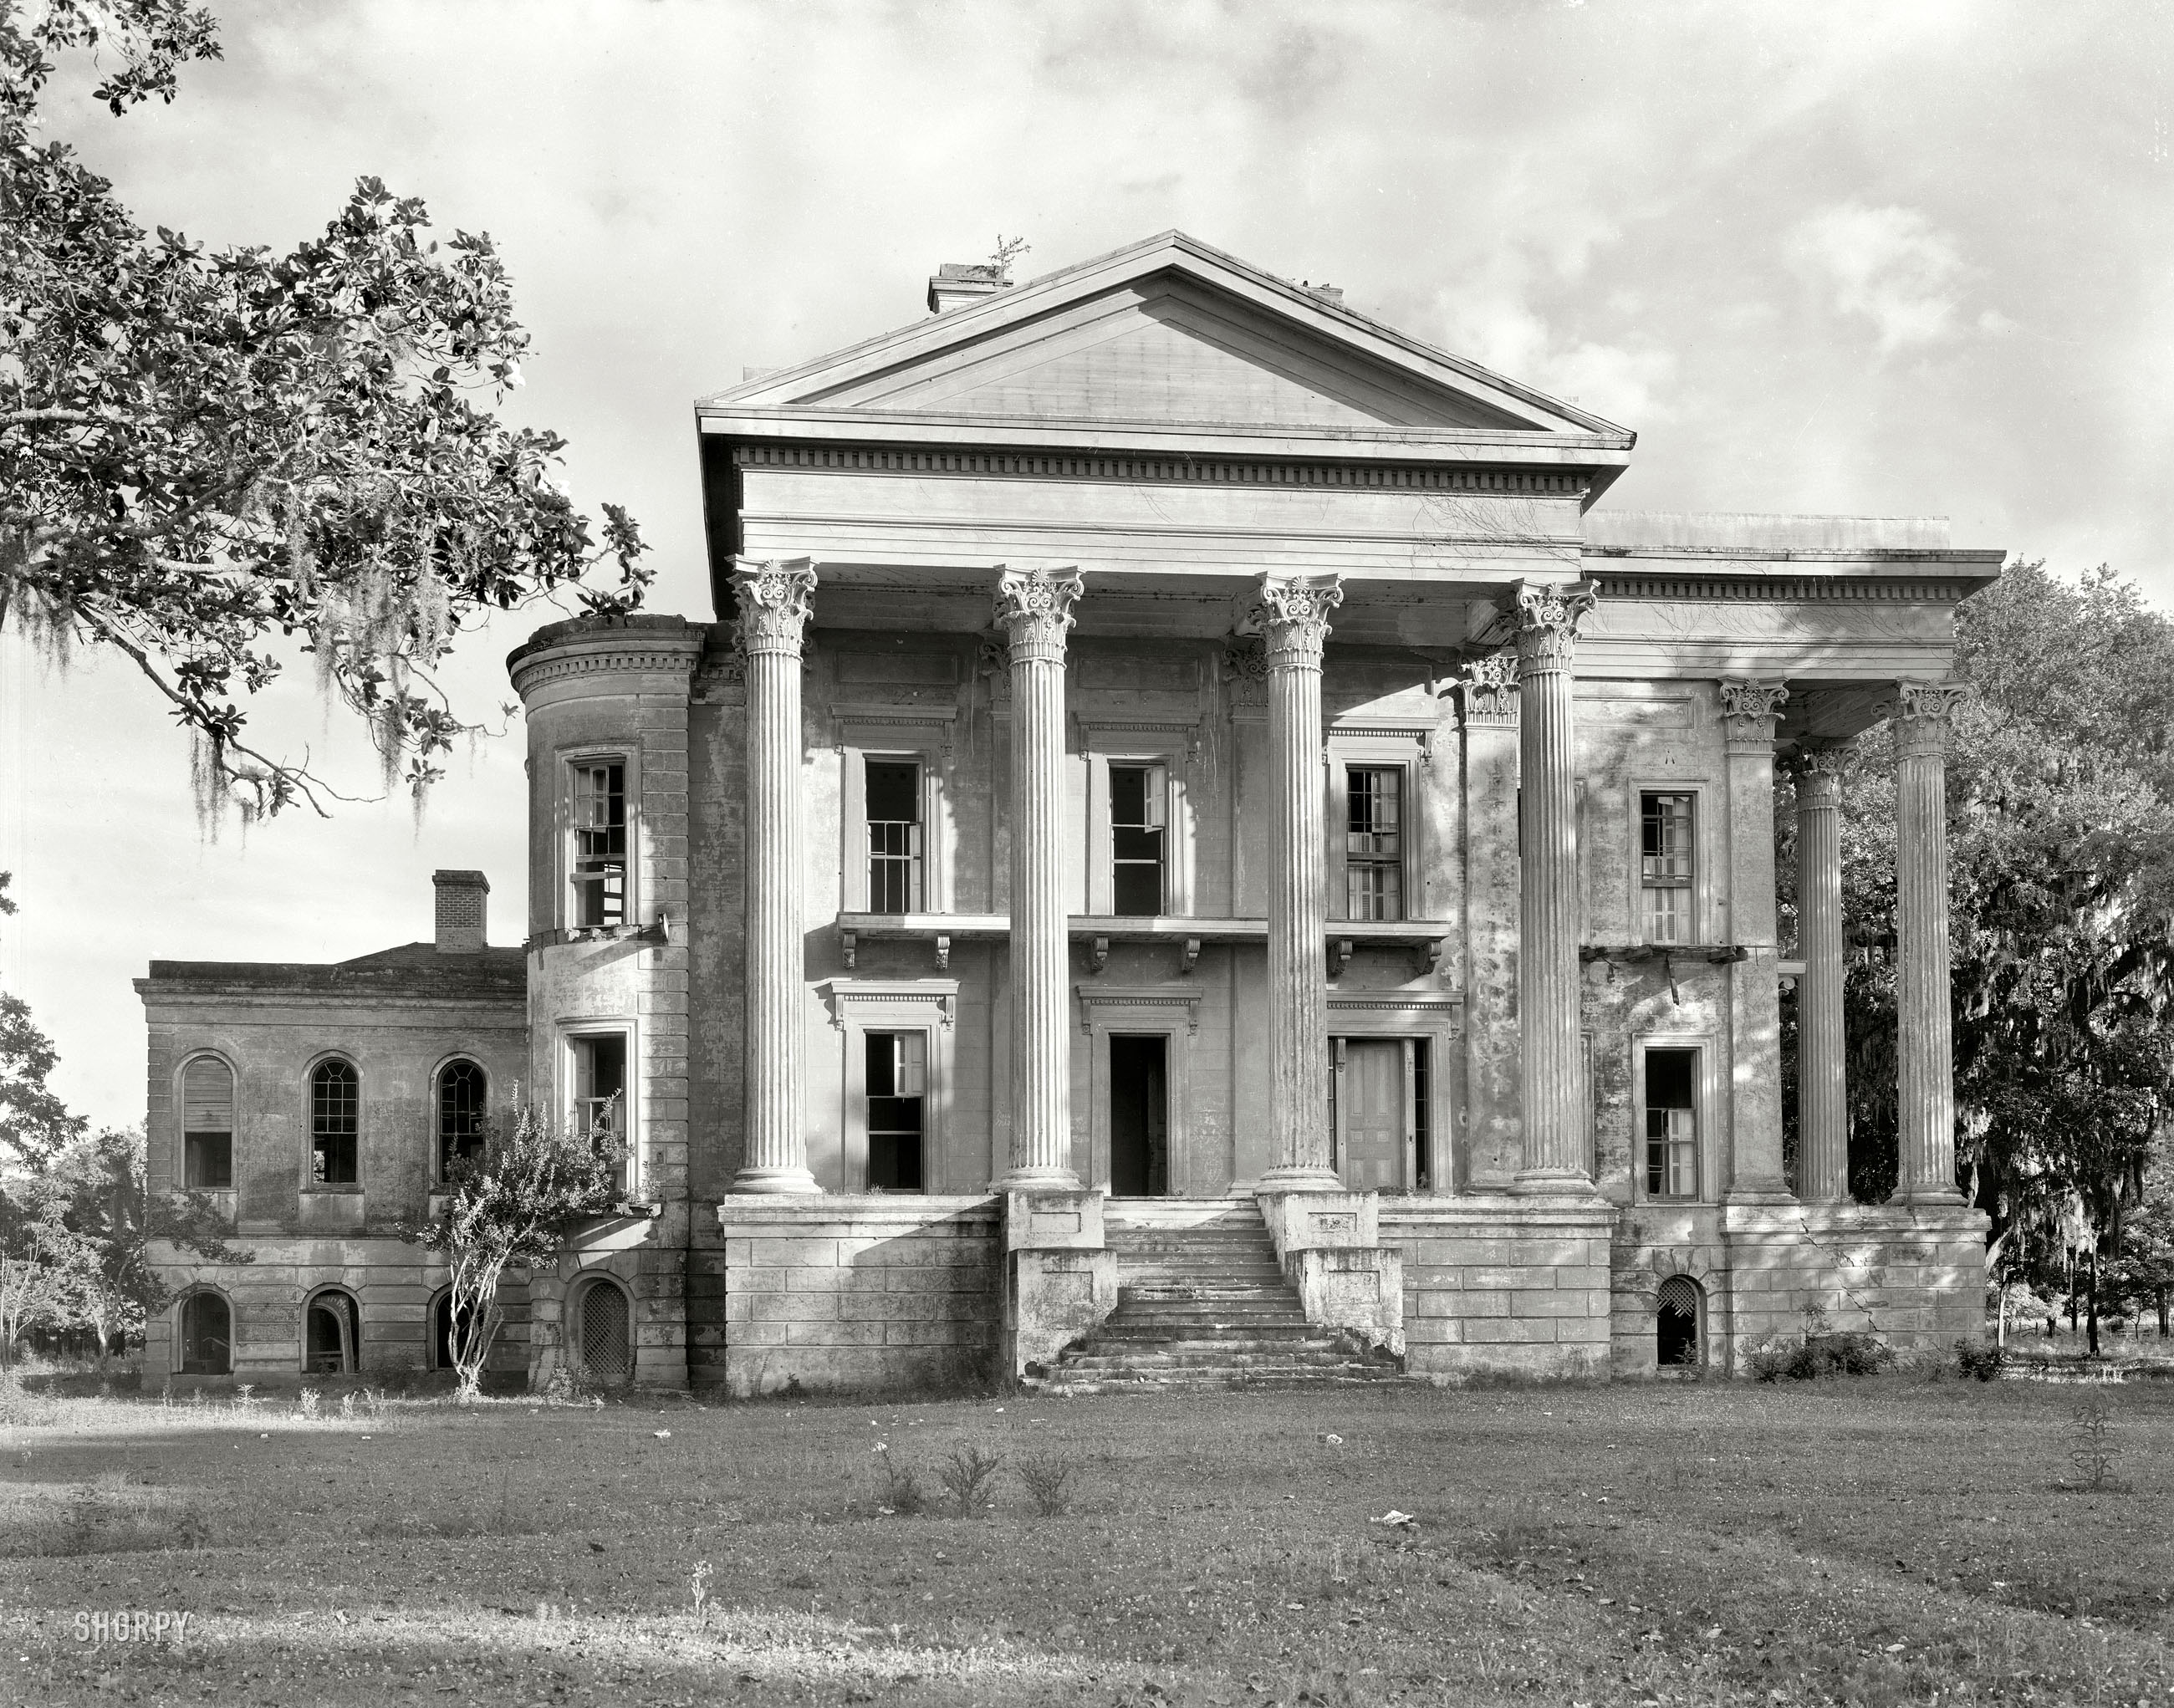 1938. Iberville Parish, Louisiana. "Belle Grove. Vicinity of White Castle. Greek Revival mansion of 75 rooms. Built 1857 by John Andrews, who sold it to Stone Ware. Occupied by Ware family until circa 1913." What was left of Belle Grove, reputedly the largest plantation house in the South, burned to the ground in 1952. 8x10 inch acetate negative by Frances Benjamin Johnston. View full size.